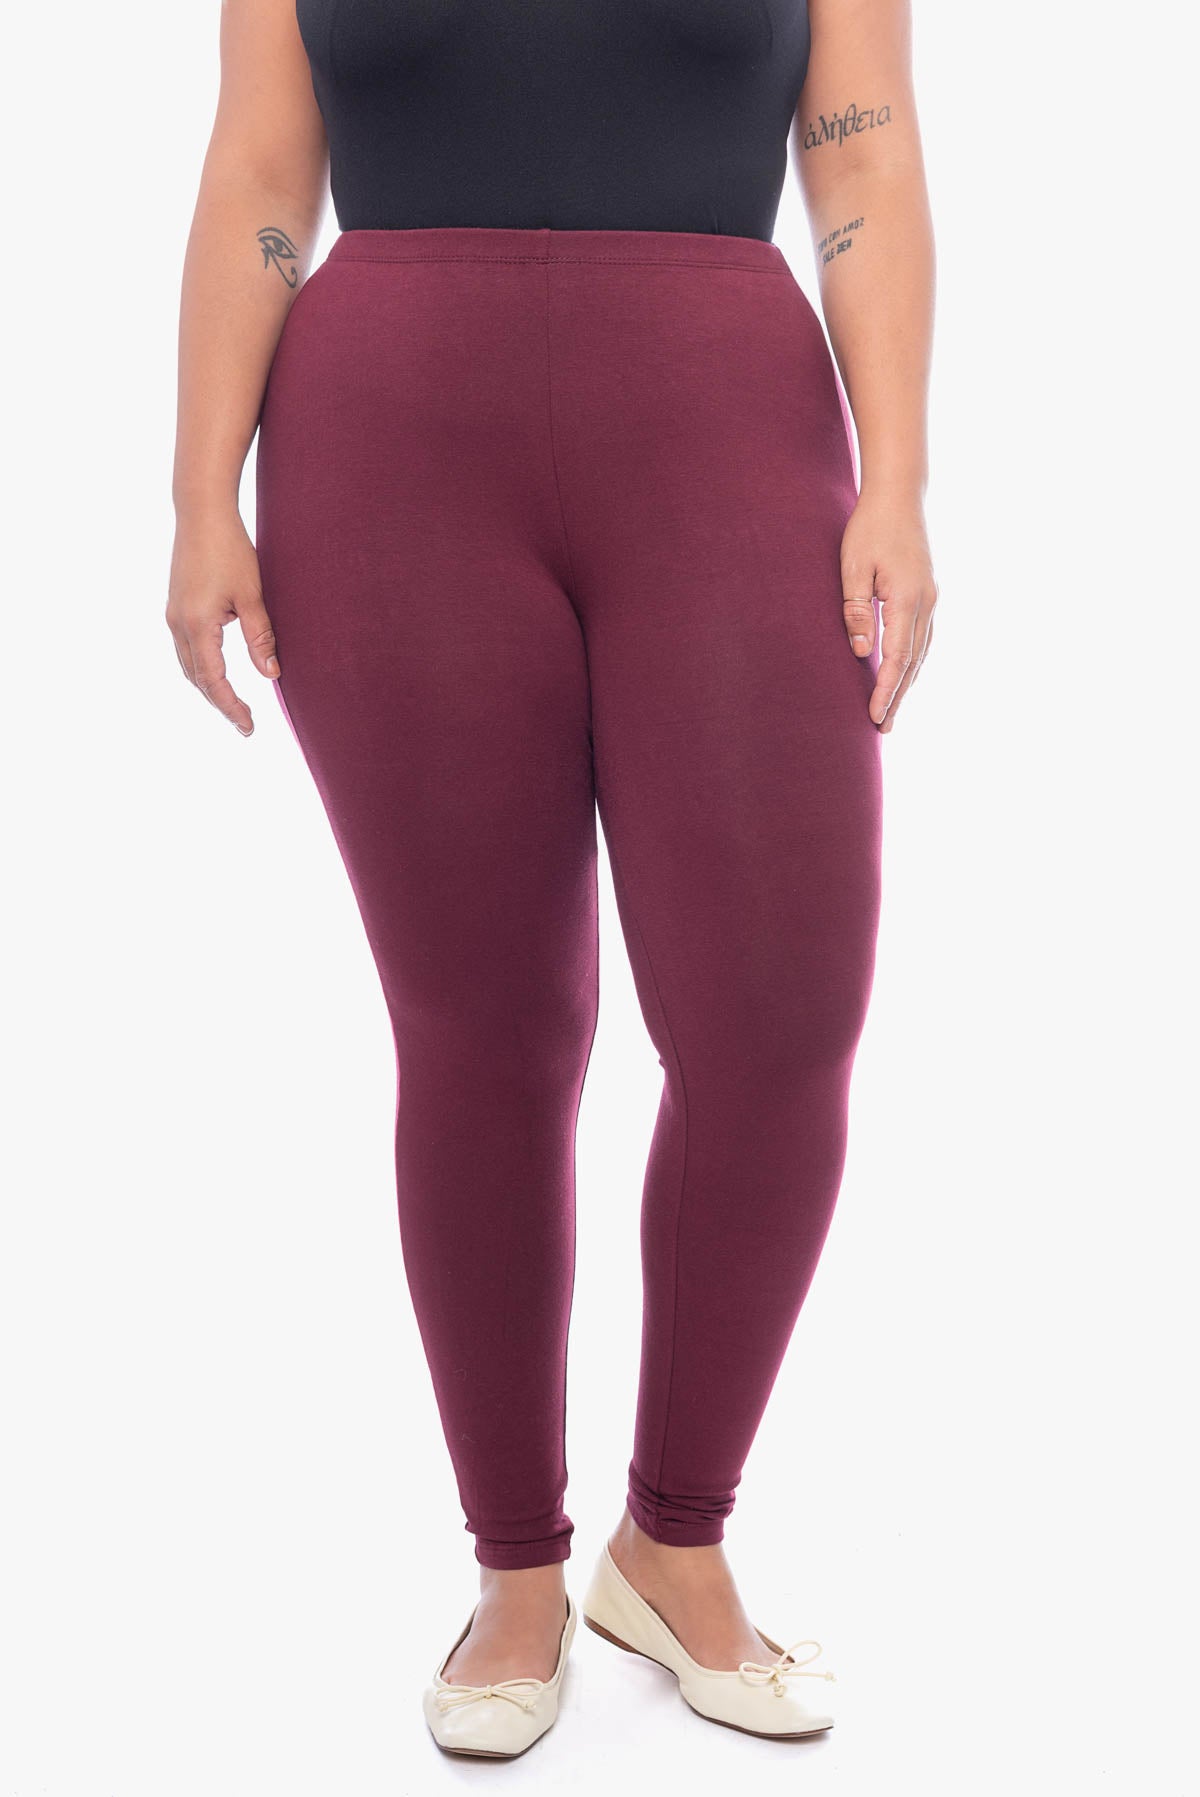 Ansley Luxe Cotton Leggings with Pockets PLUS  Leggings are not pants, Cotton  leggings, High waisted yoga leggings